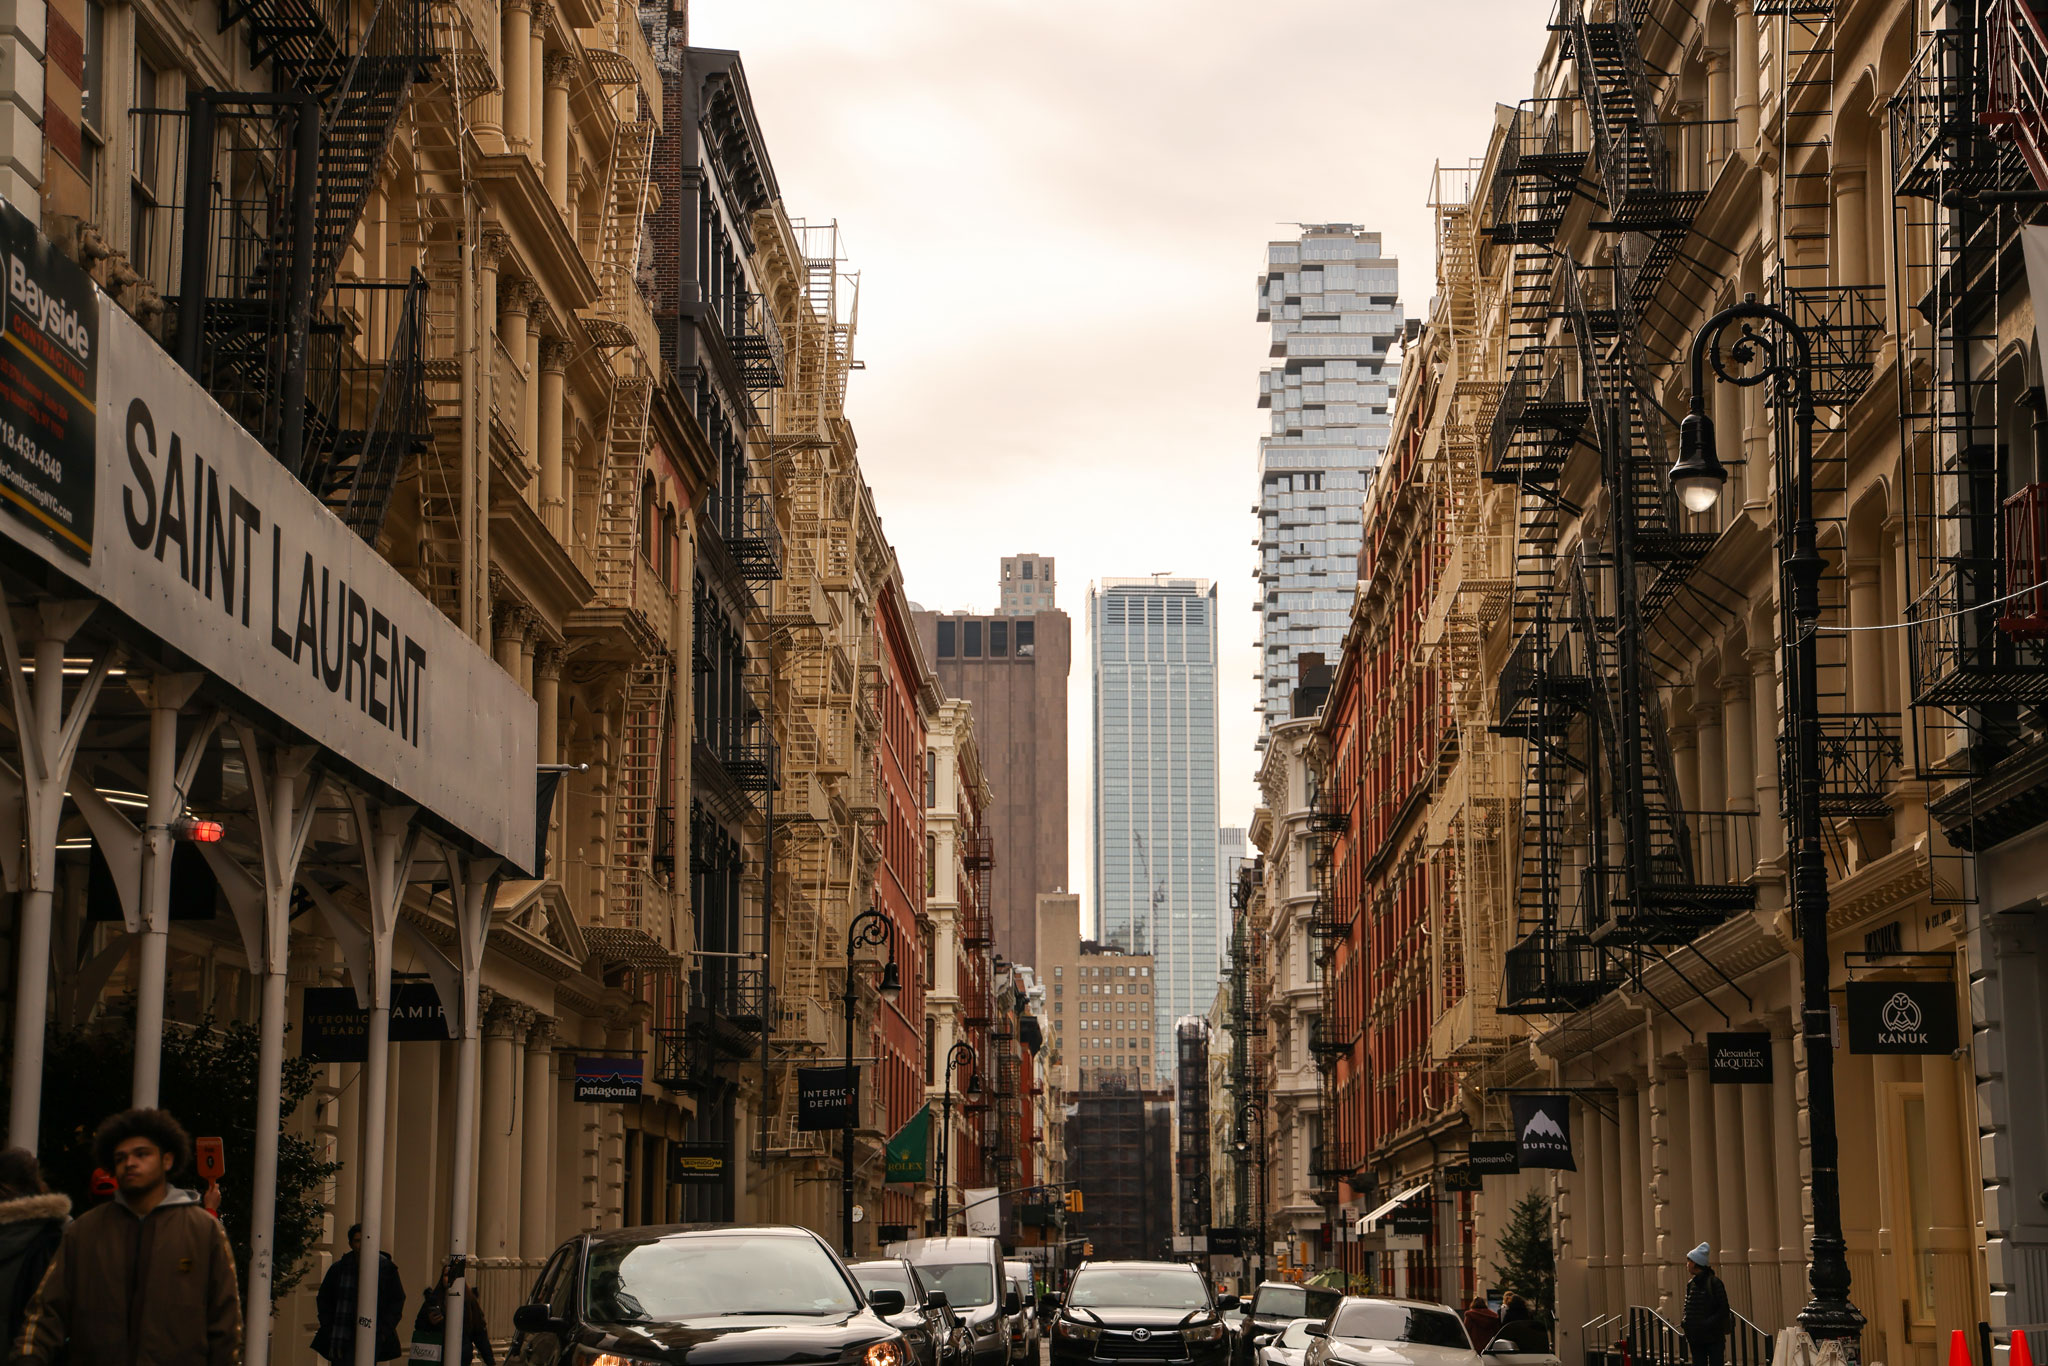 3 Perfect Photography Spots in New York City - Behind the Scenes NYC  (BTSNYC)